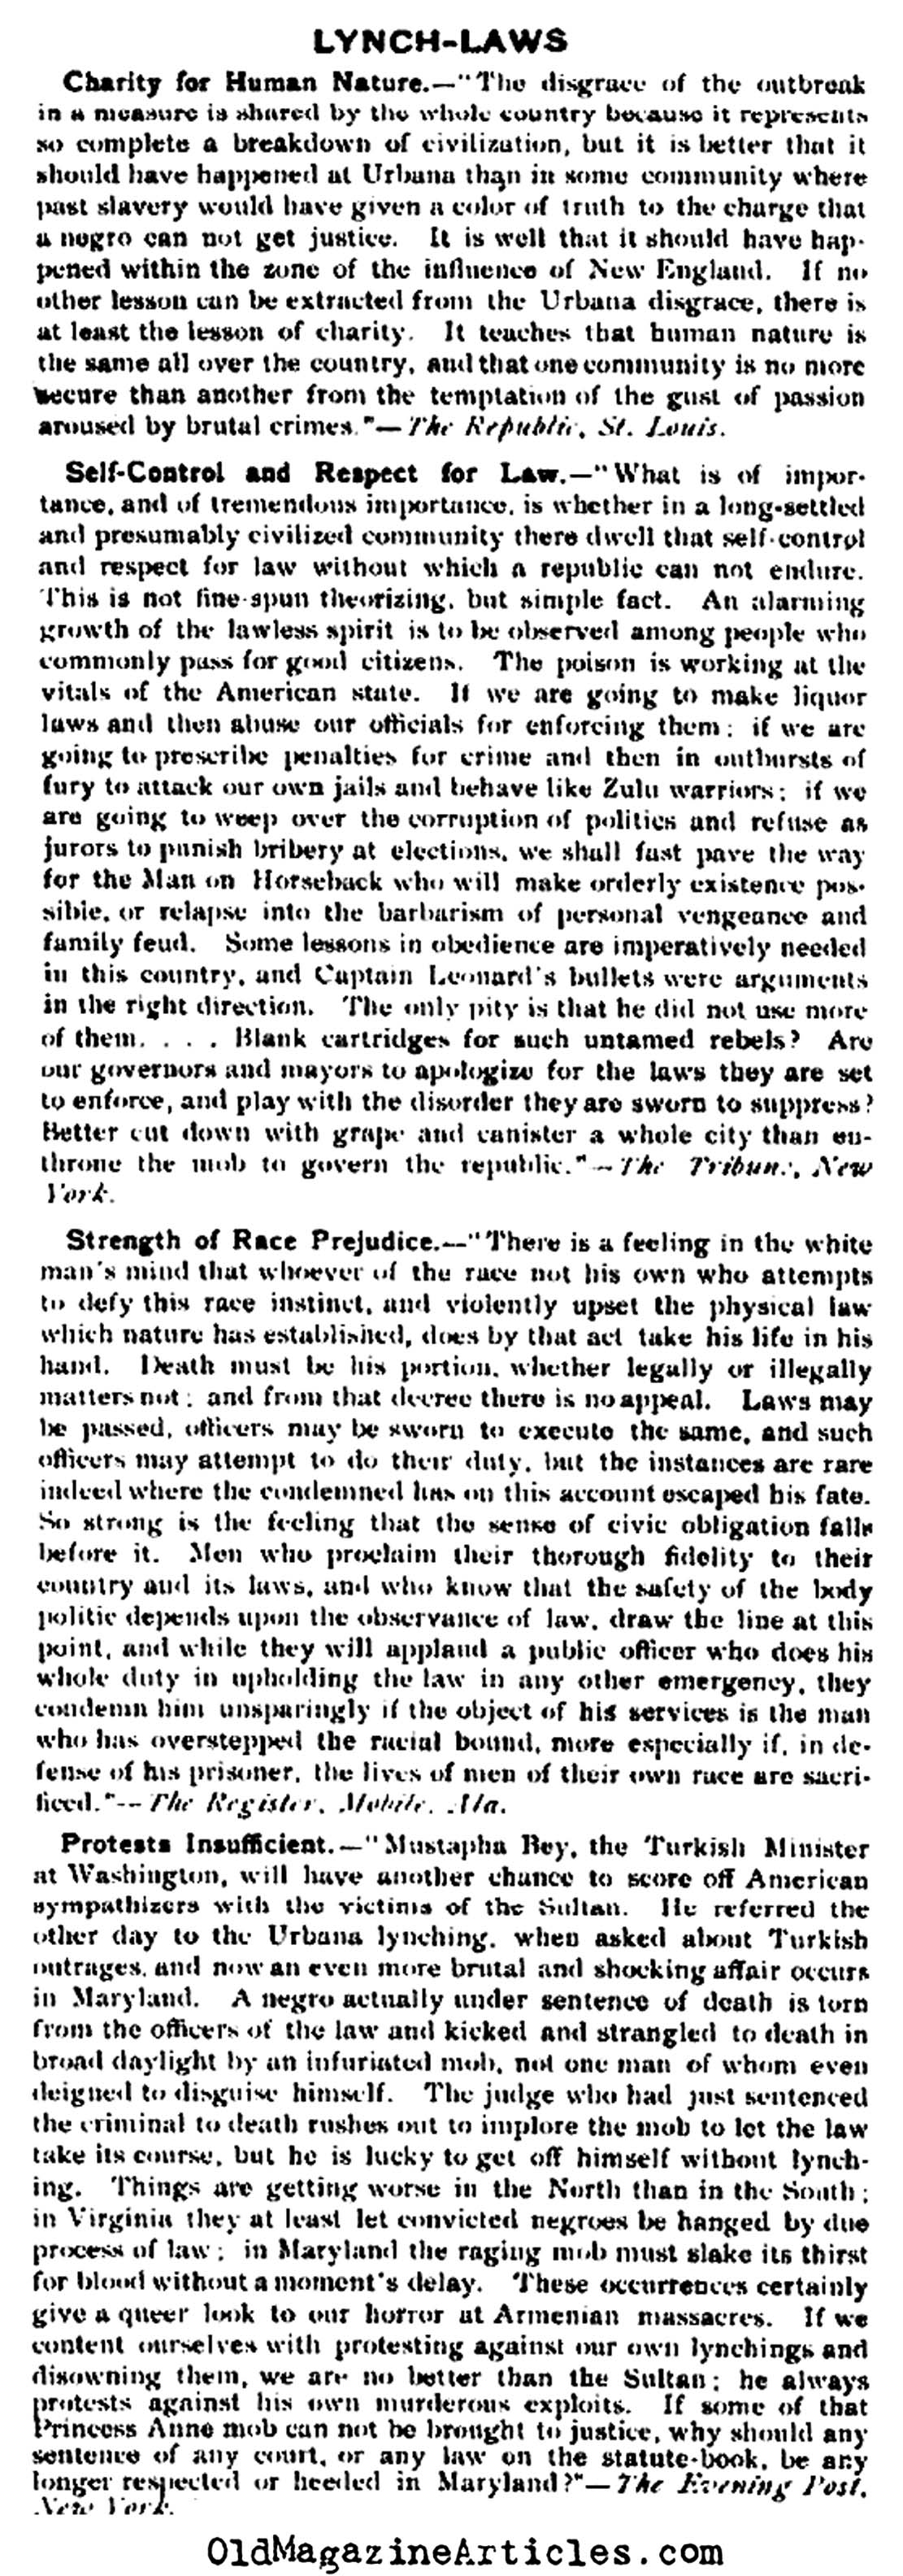 Lynch Mobs in Ohio and Elsewhere (Literary Digest, 1897)